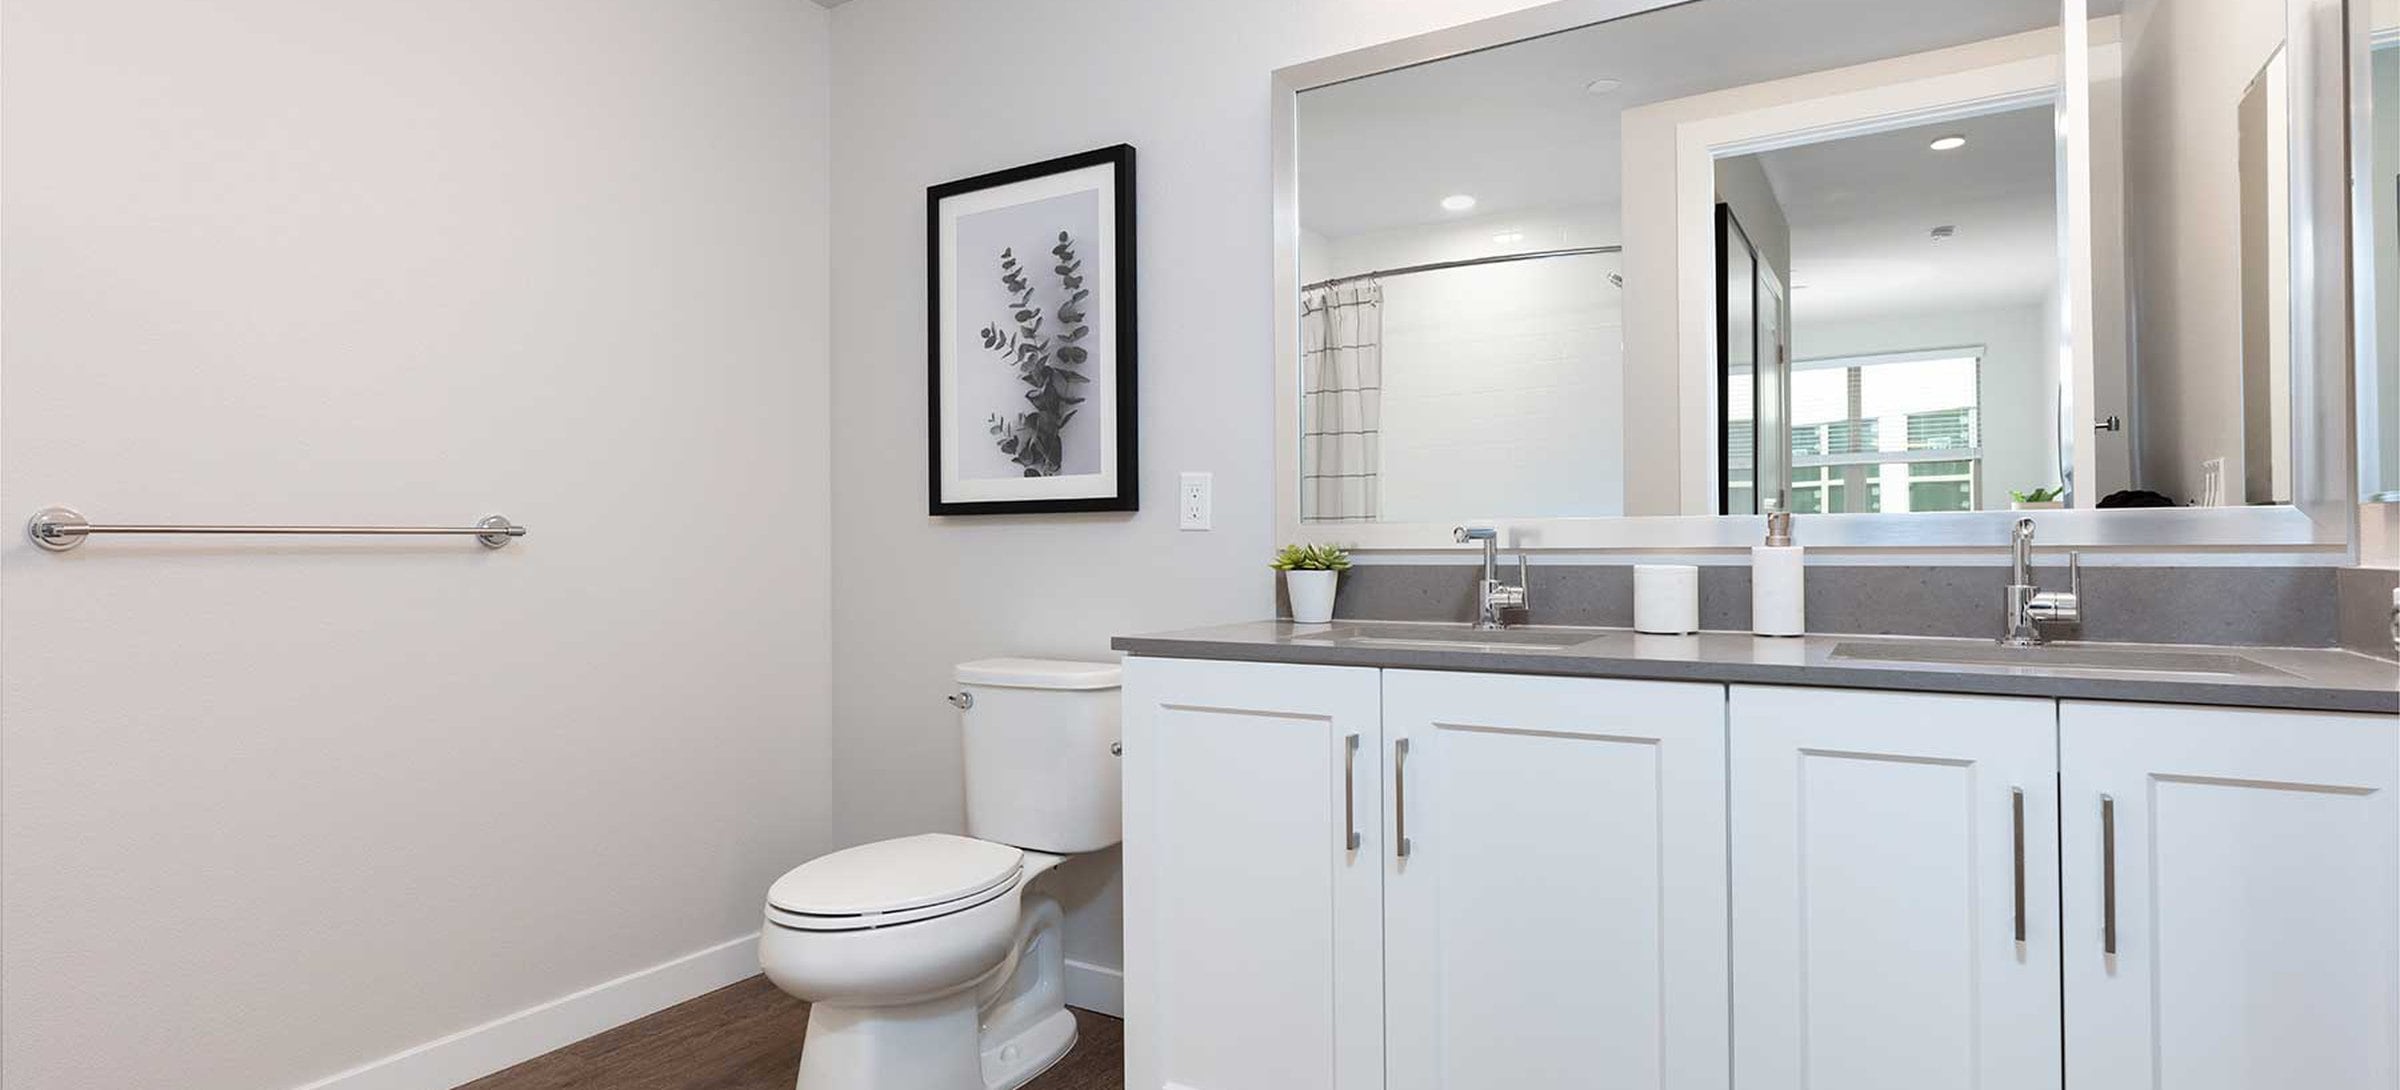 Upgrade Collection bath with white cabinetry, grey quartz countertop, and hard surface flooring